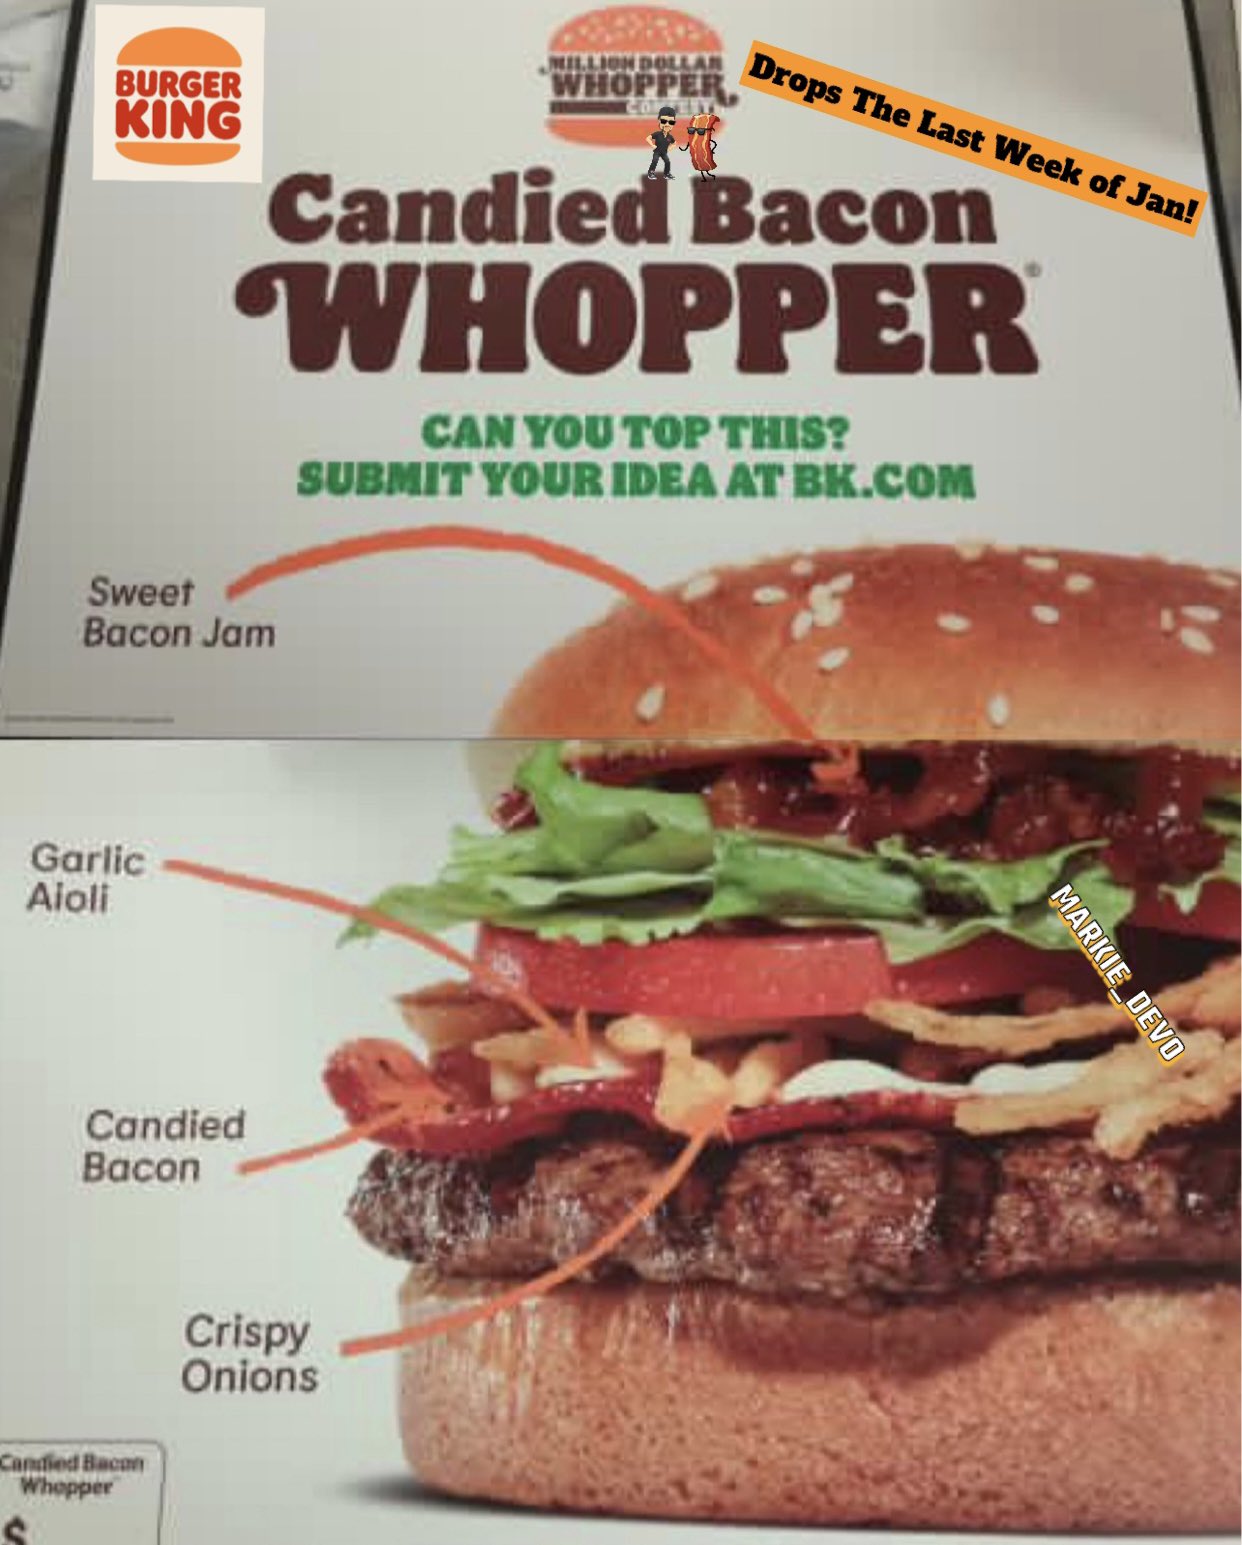 Markie Devo on X: The NEW Burger King Candied Bacon Whopper